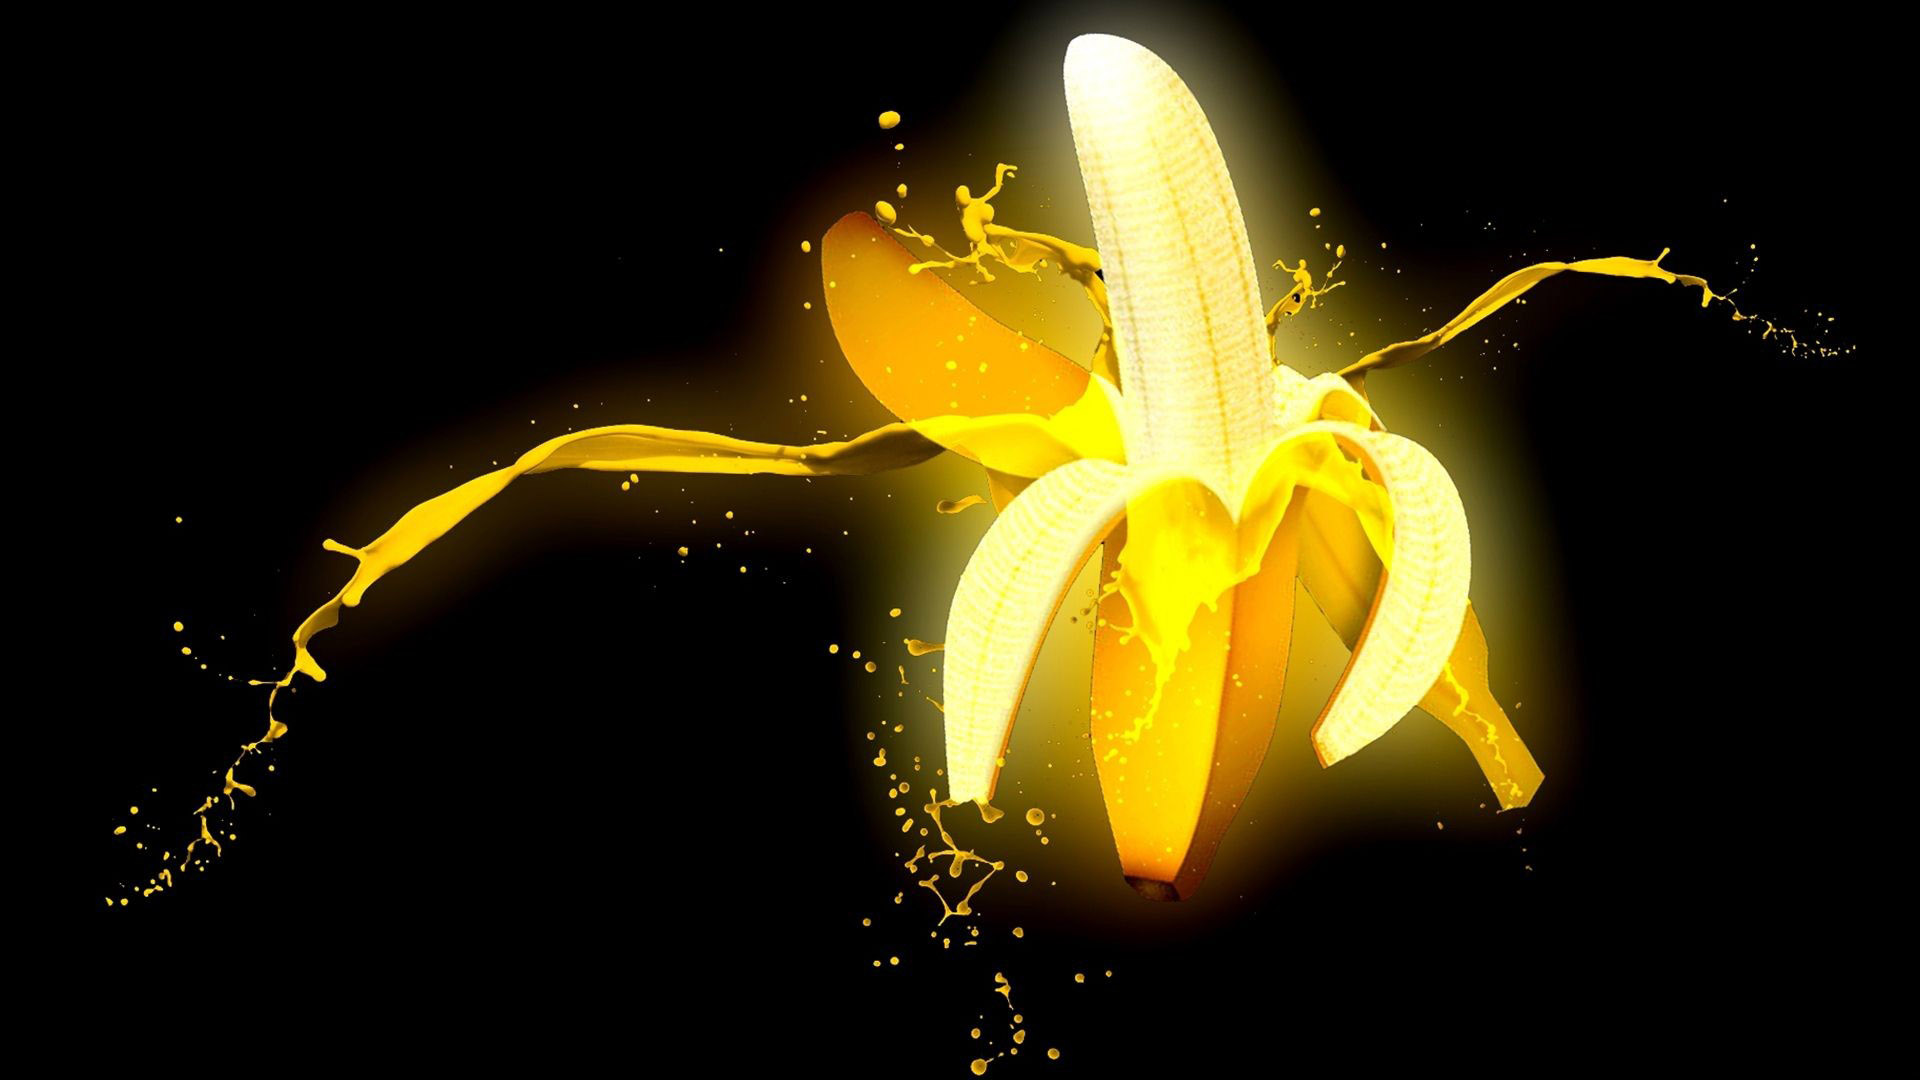 banana 1080P 2k 4k HD wallpapers backgrounds free download  Rare  Gallery